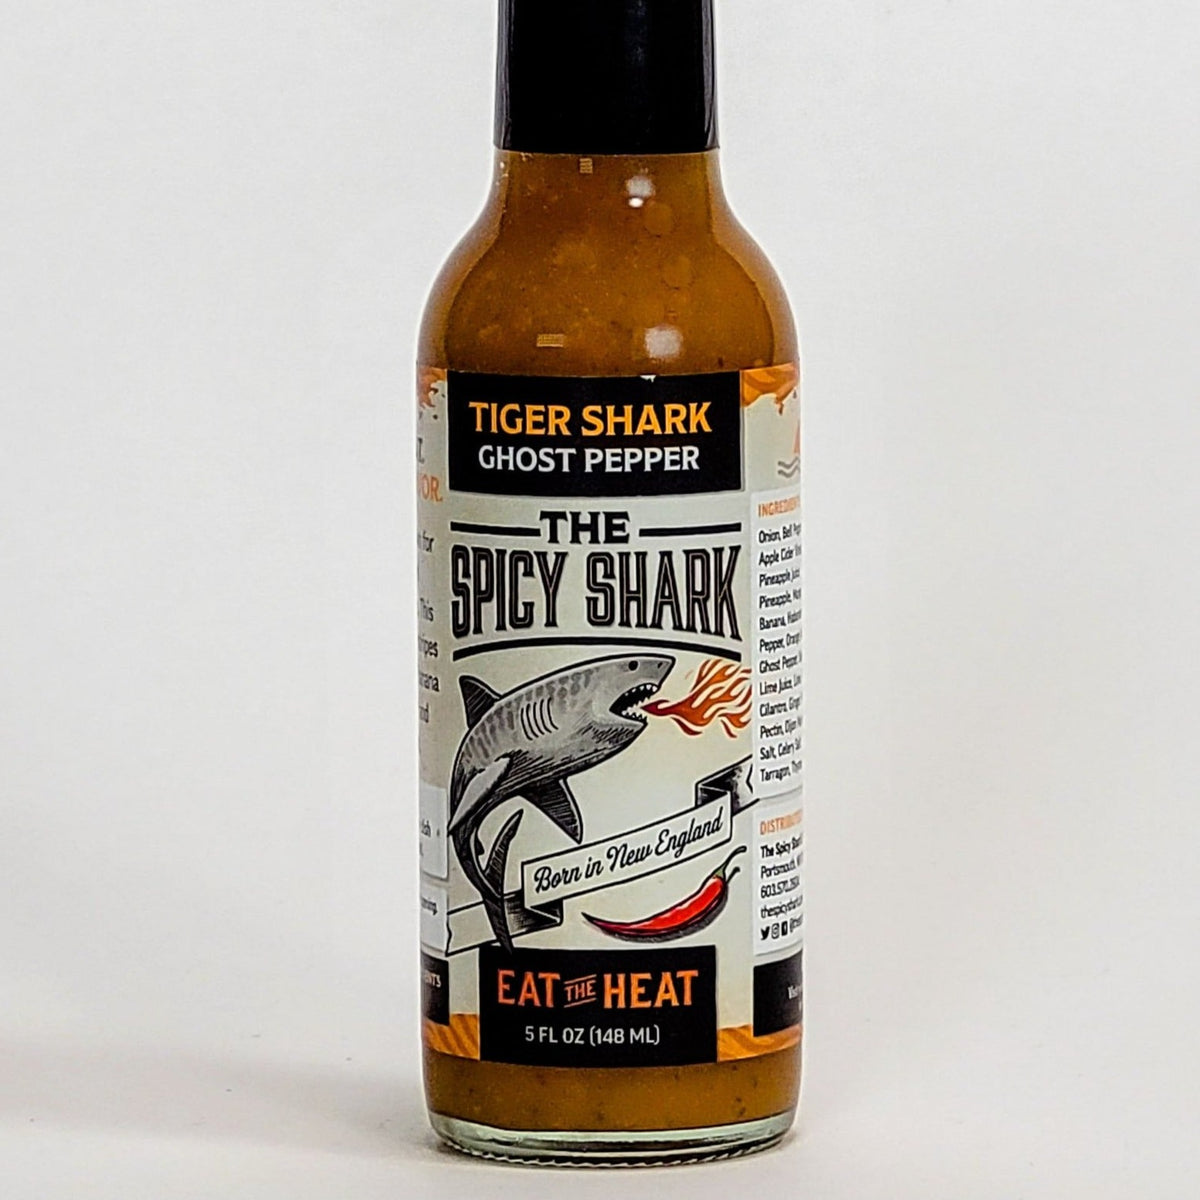 the spicy shark tiger shark ghost pepper hot sauce label